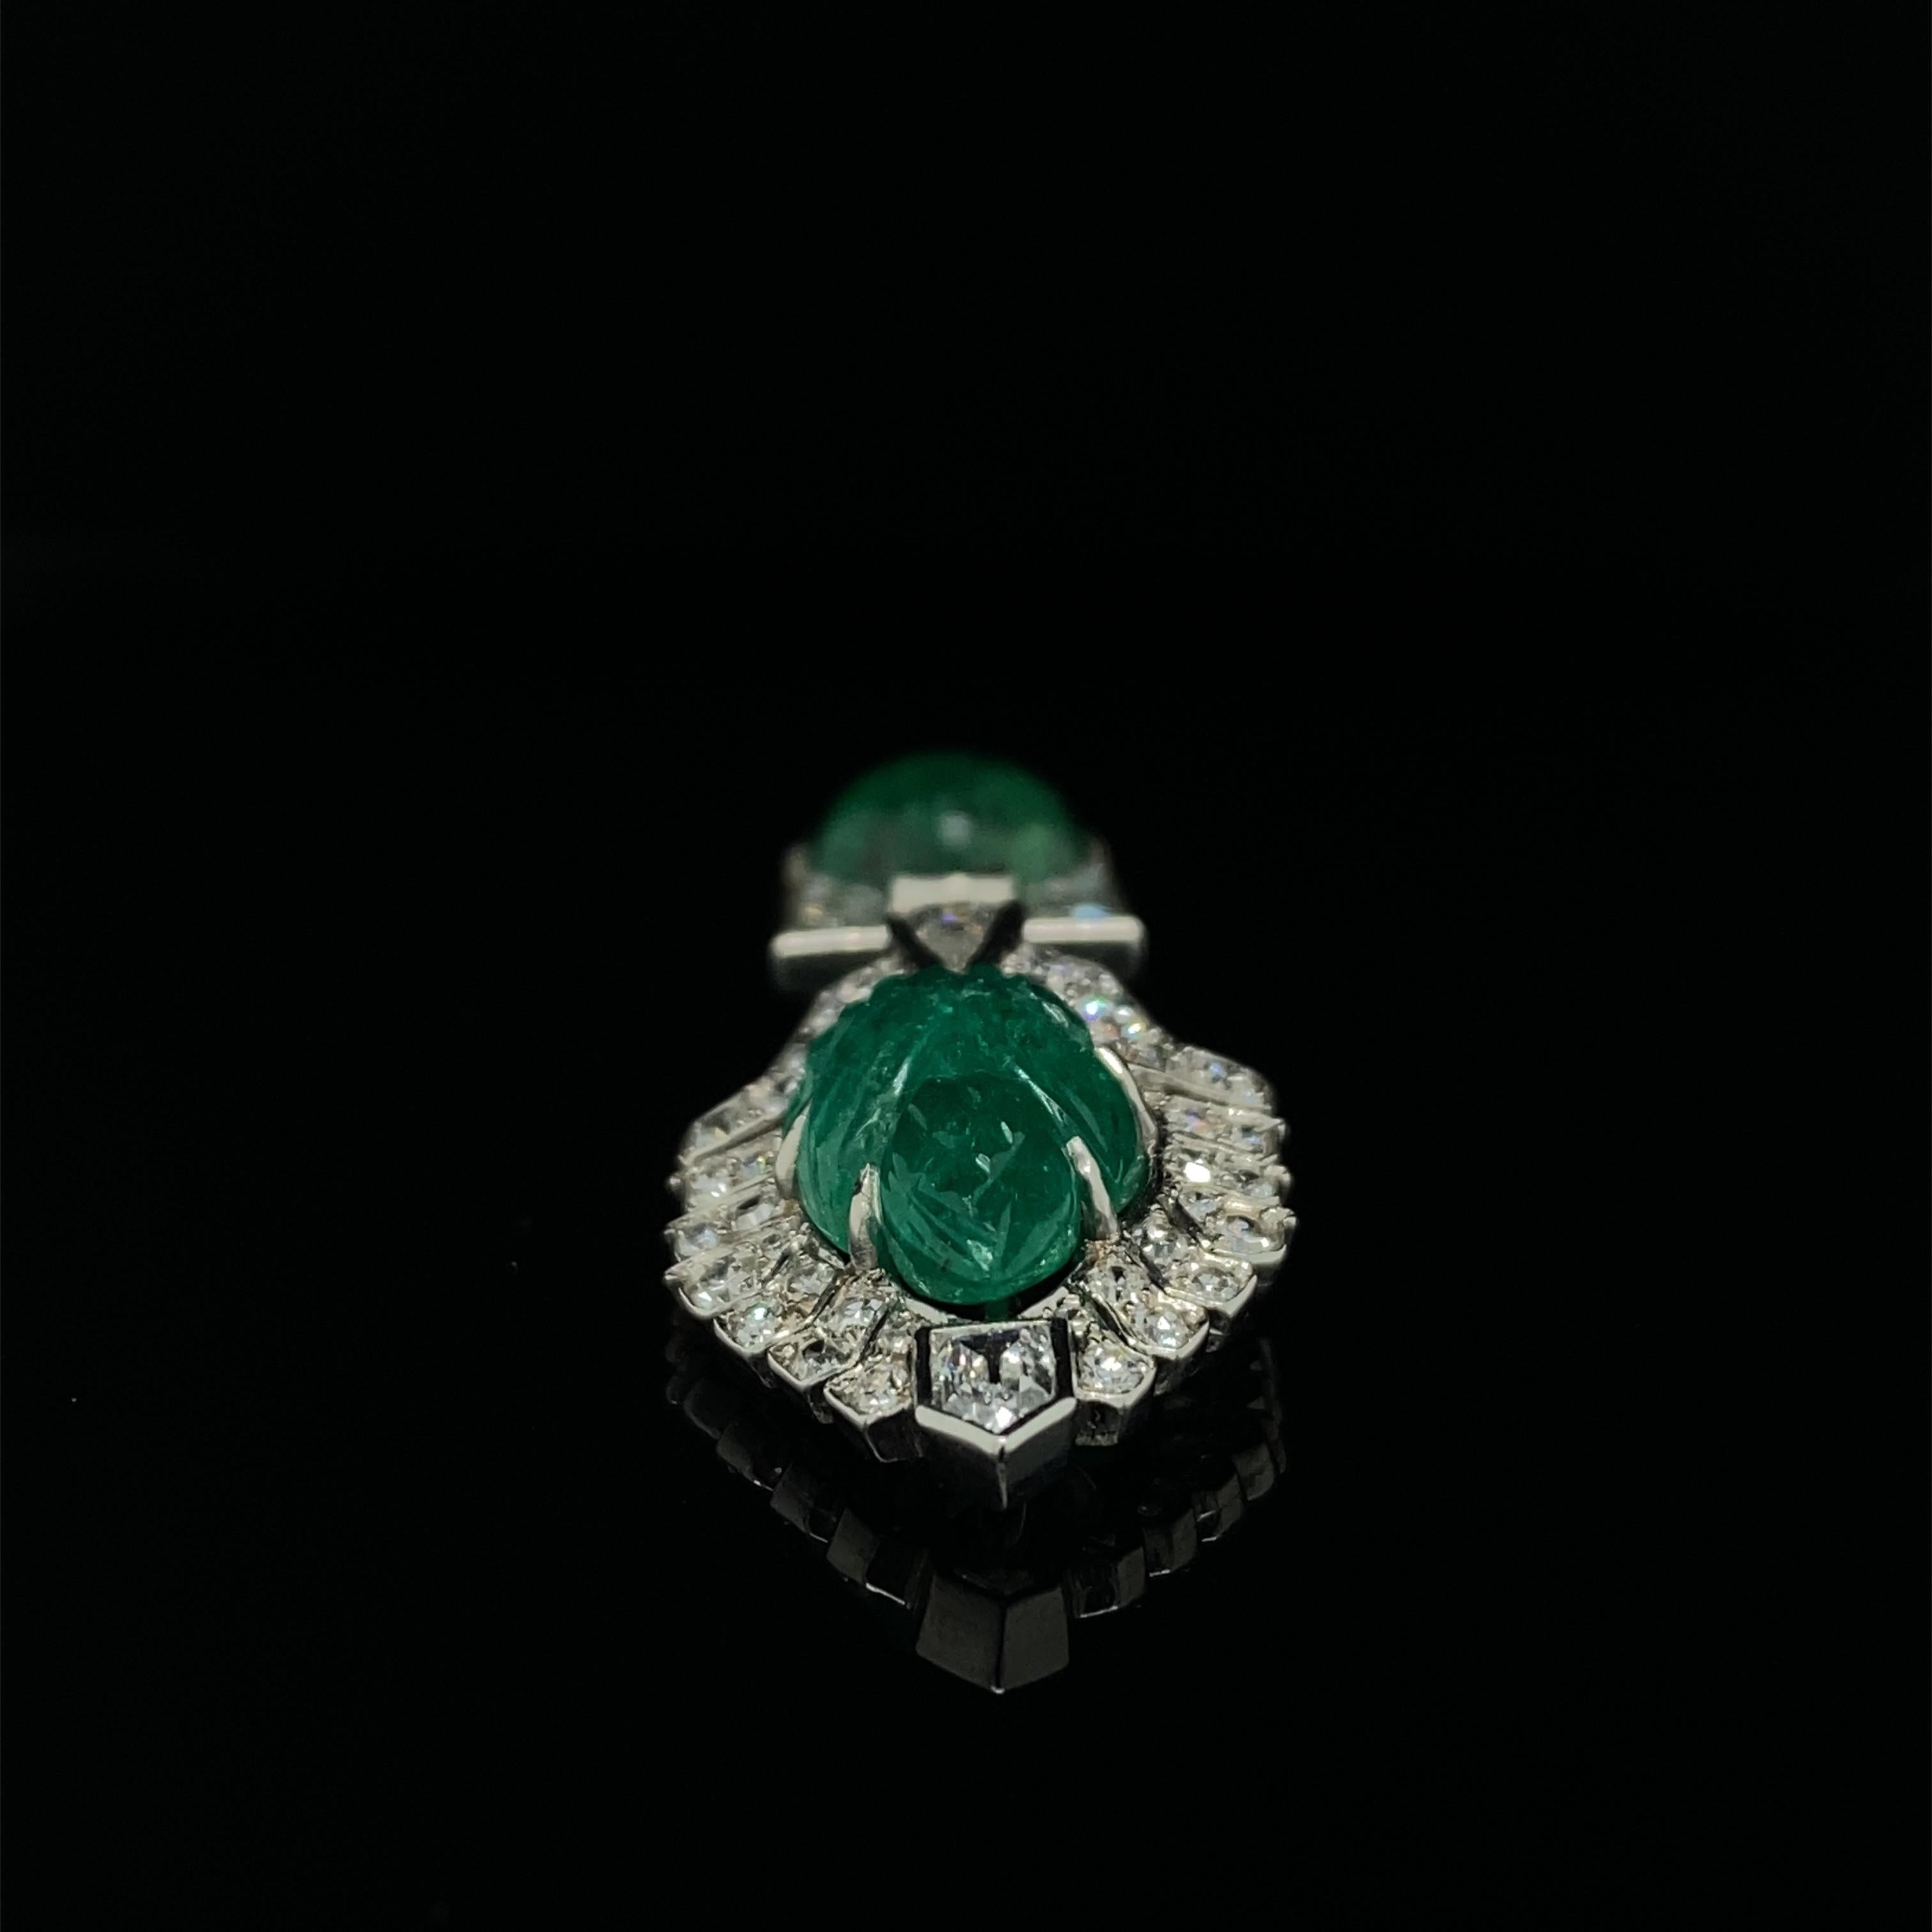 A Cartier Art Deco carved emerald and diamond jabot pin, circa 1925.

This exquisite jabot pin embodies the glamour and modish motifs of the Roaring 20s perfectly.

The top is set with a carved palmette shaped emerald enhanced by a single cut,